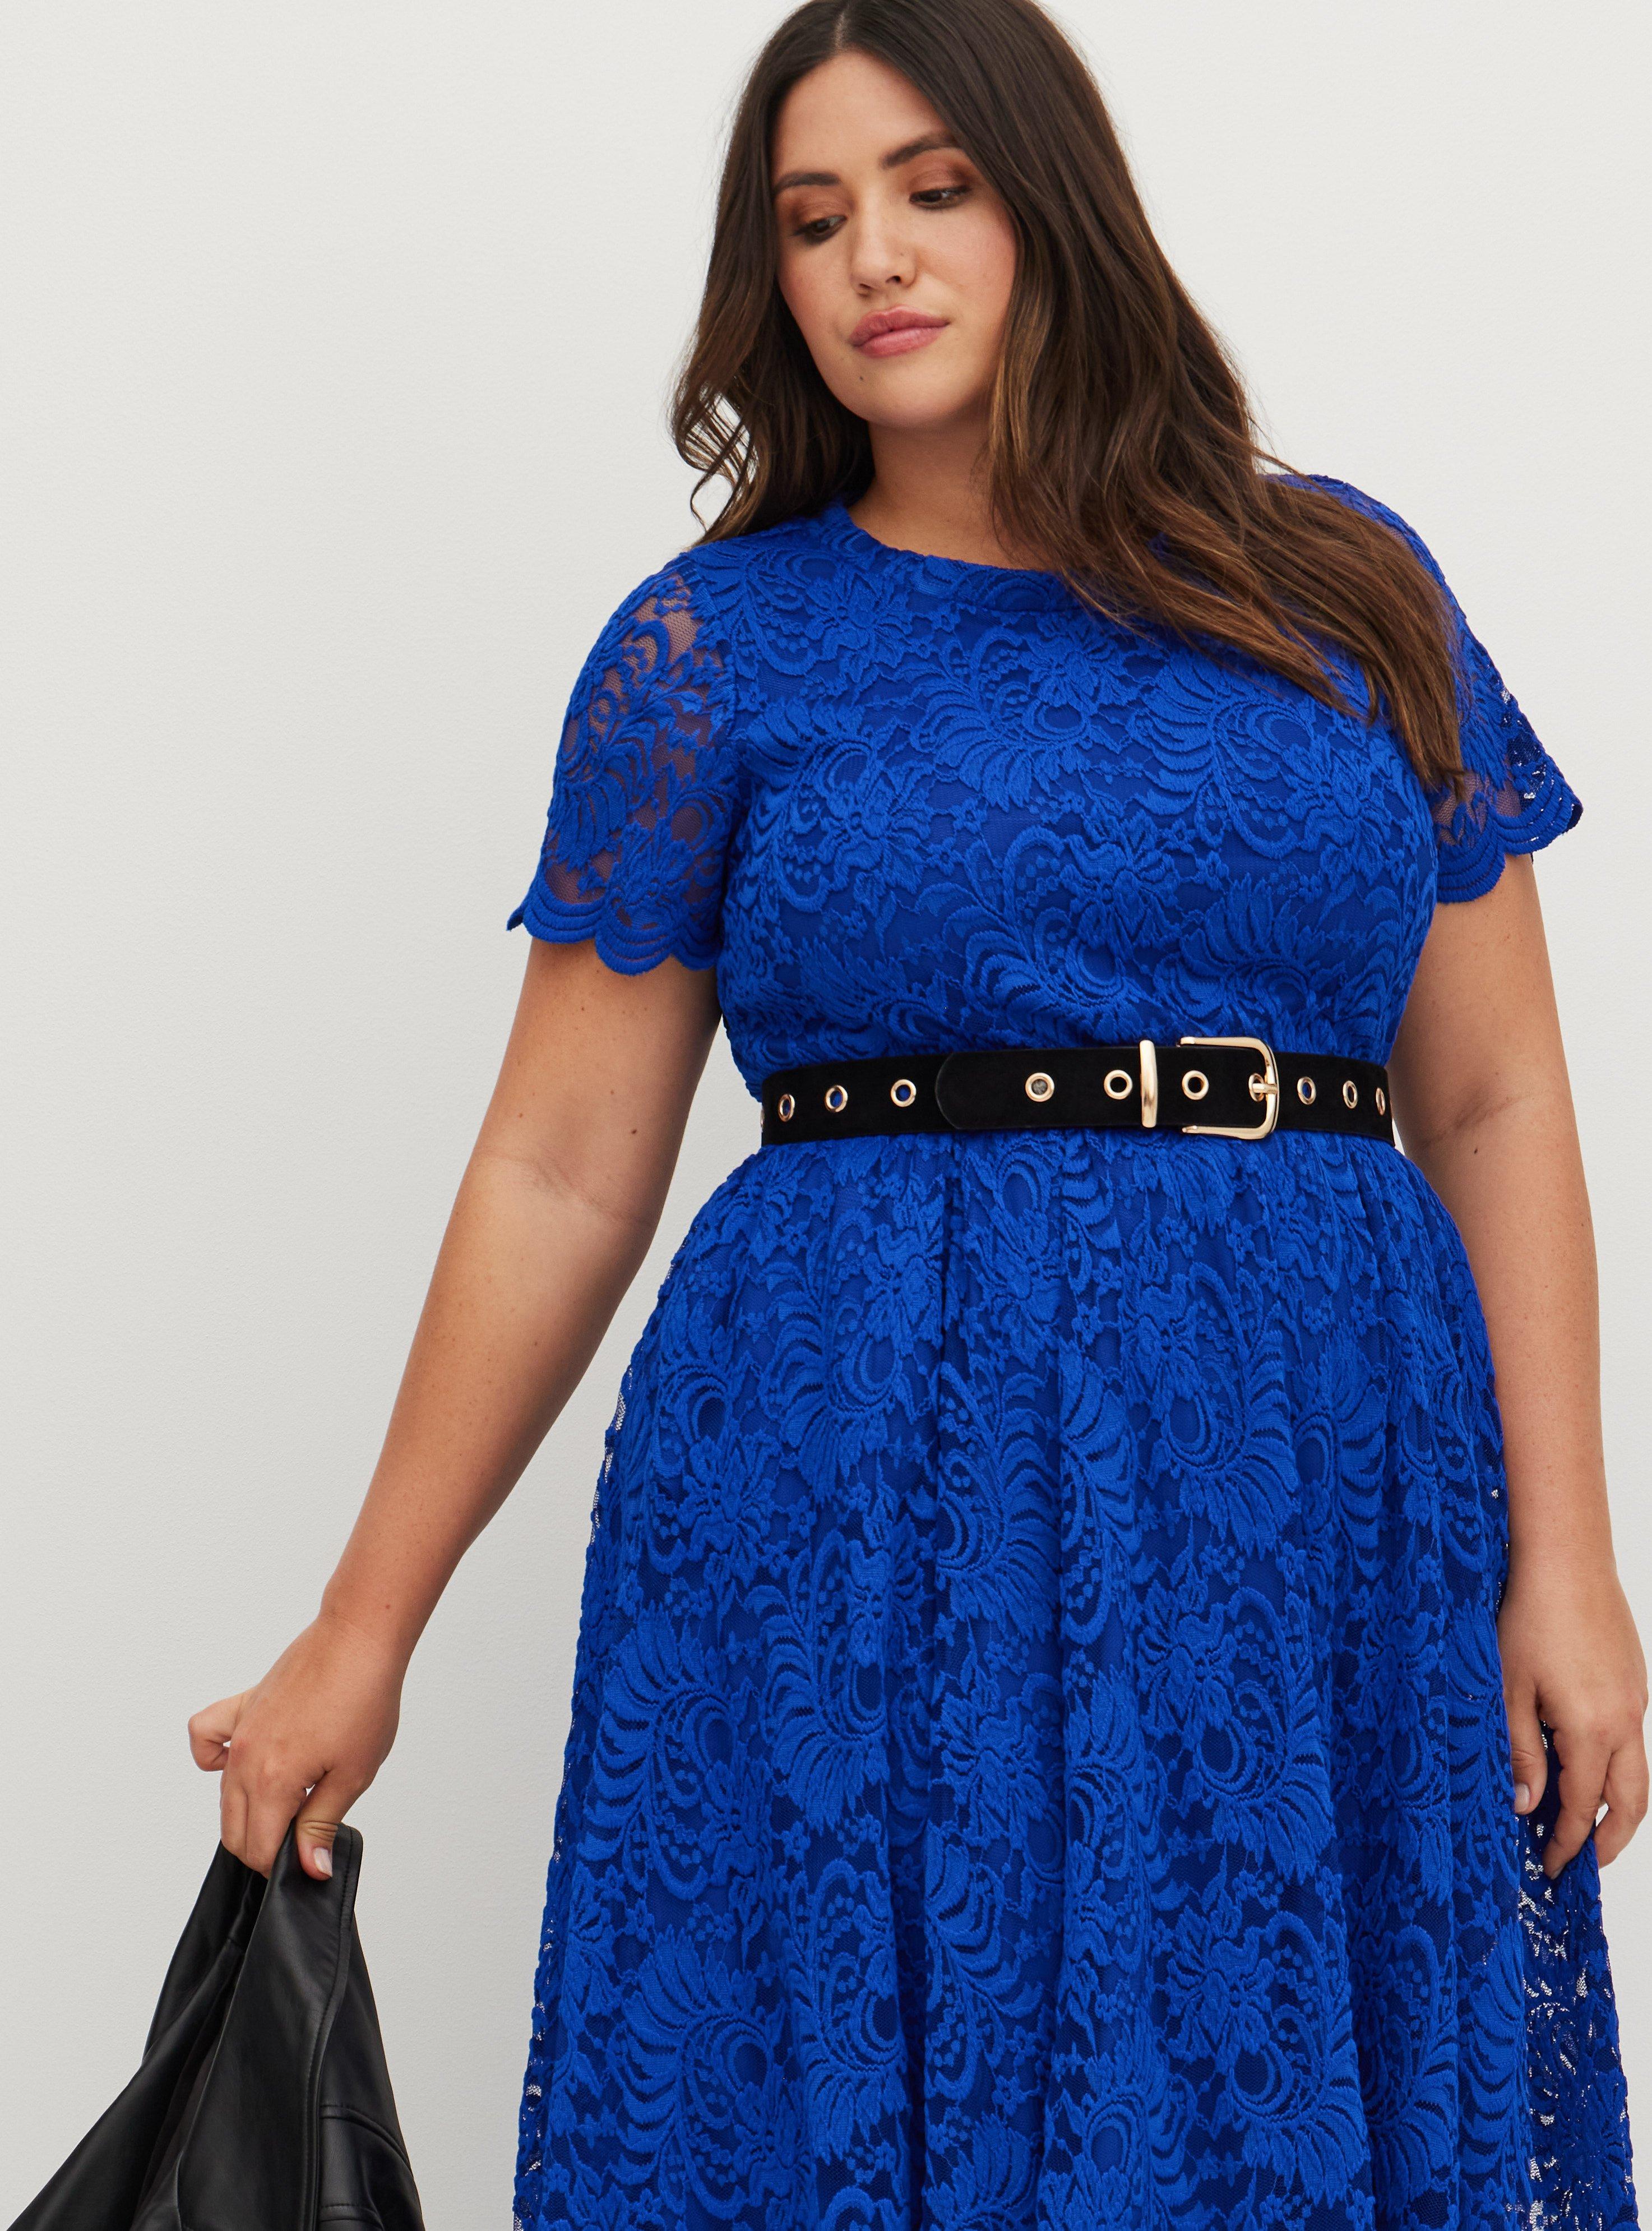 HOW WE FIT  About Torrid Clothing